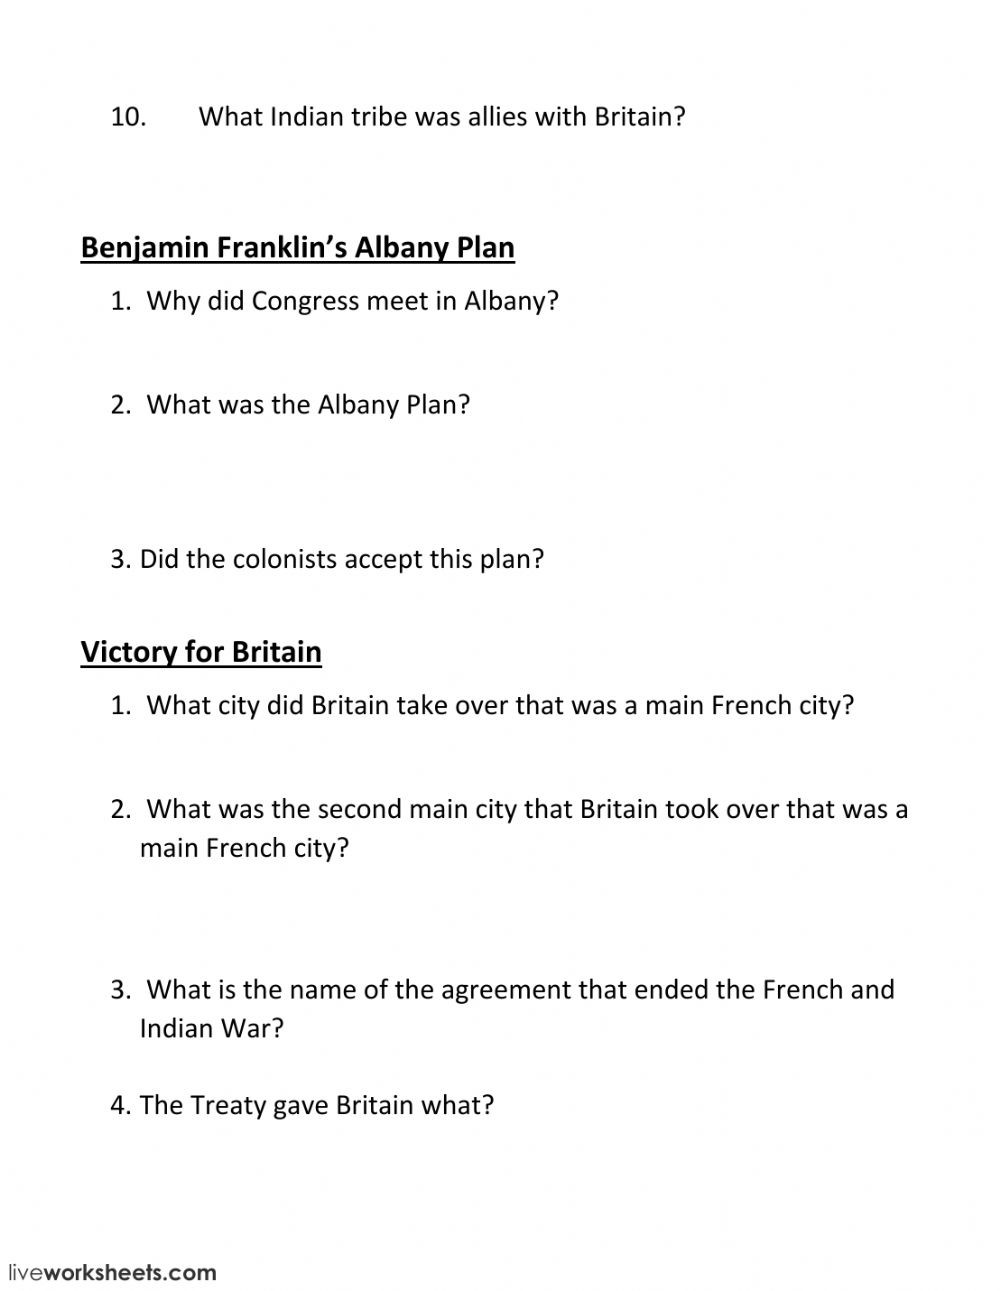 French and Indian War Worksheet French and Indian War Worksheet